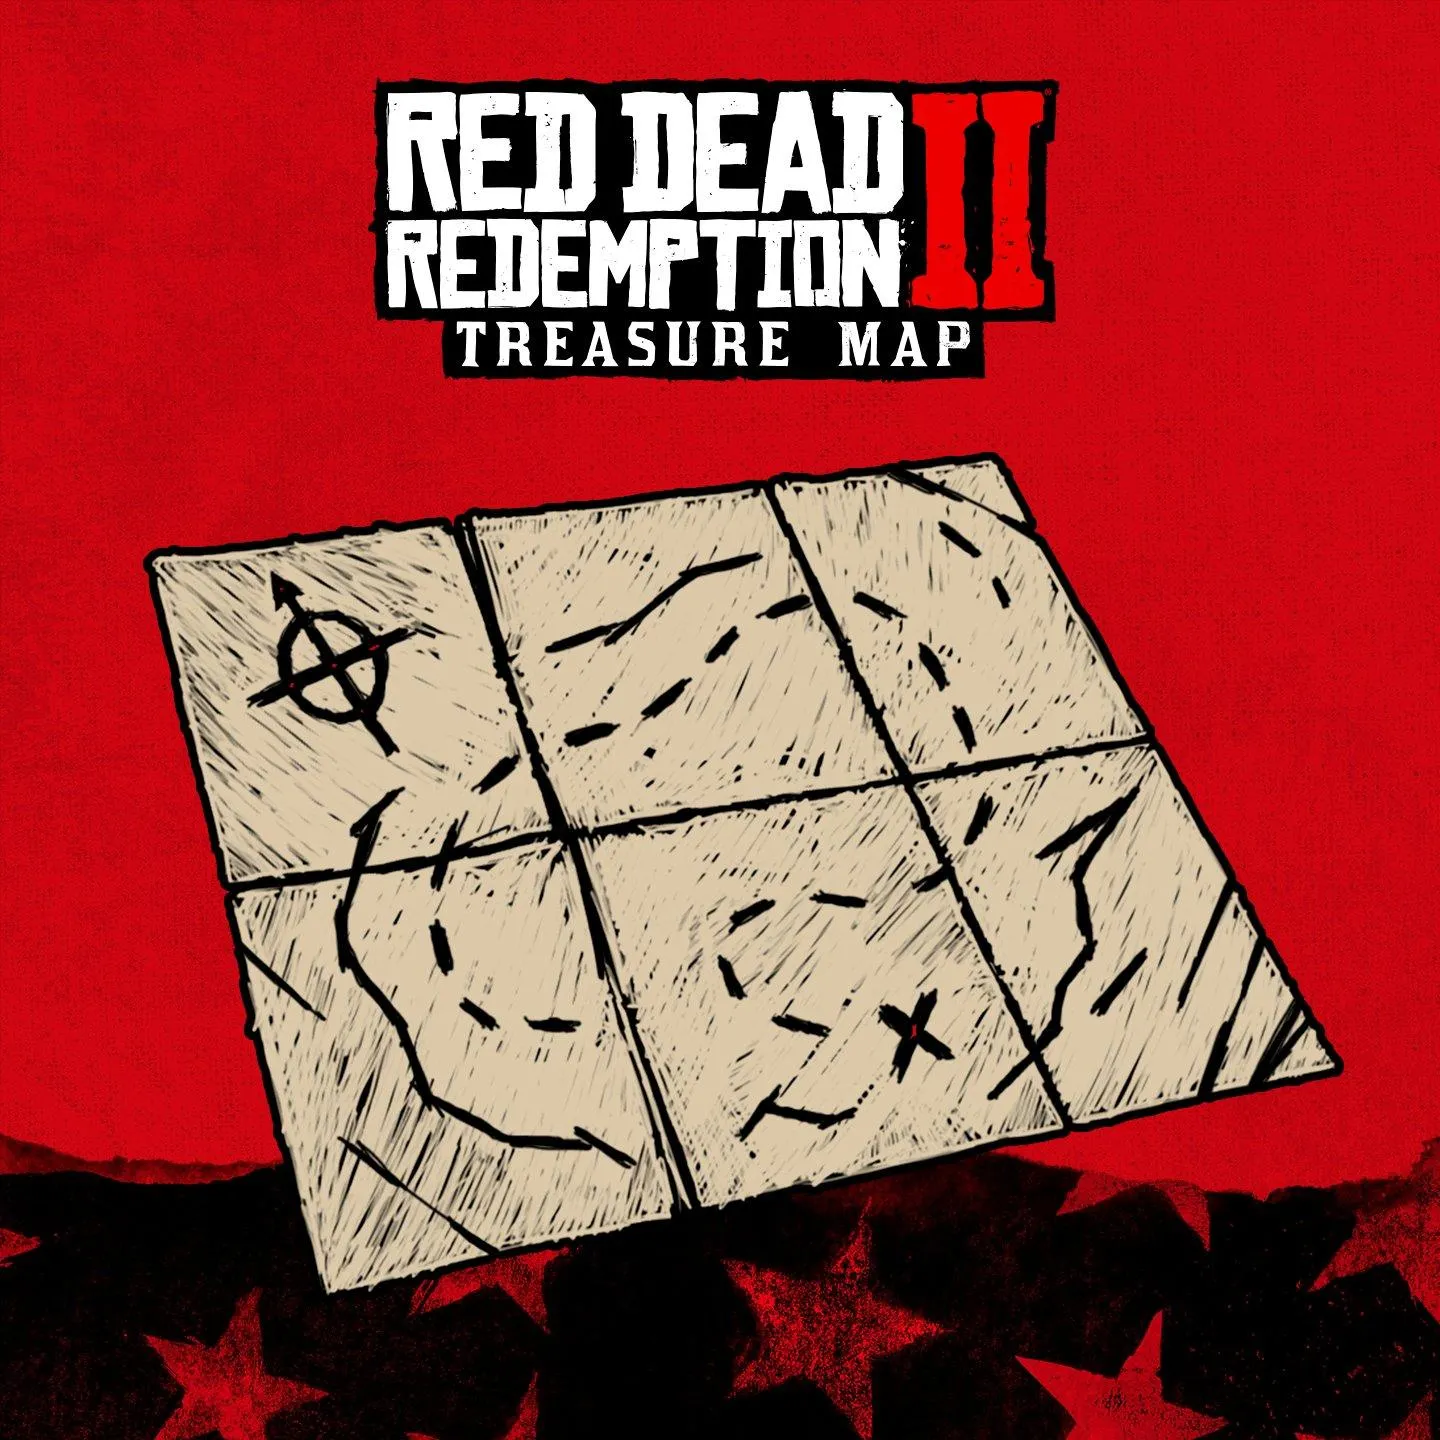 Red Dead Redemption 2: Treasure Map deadline extended